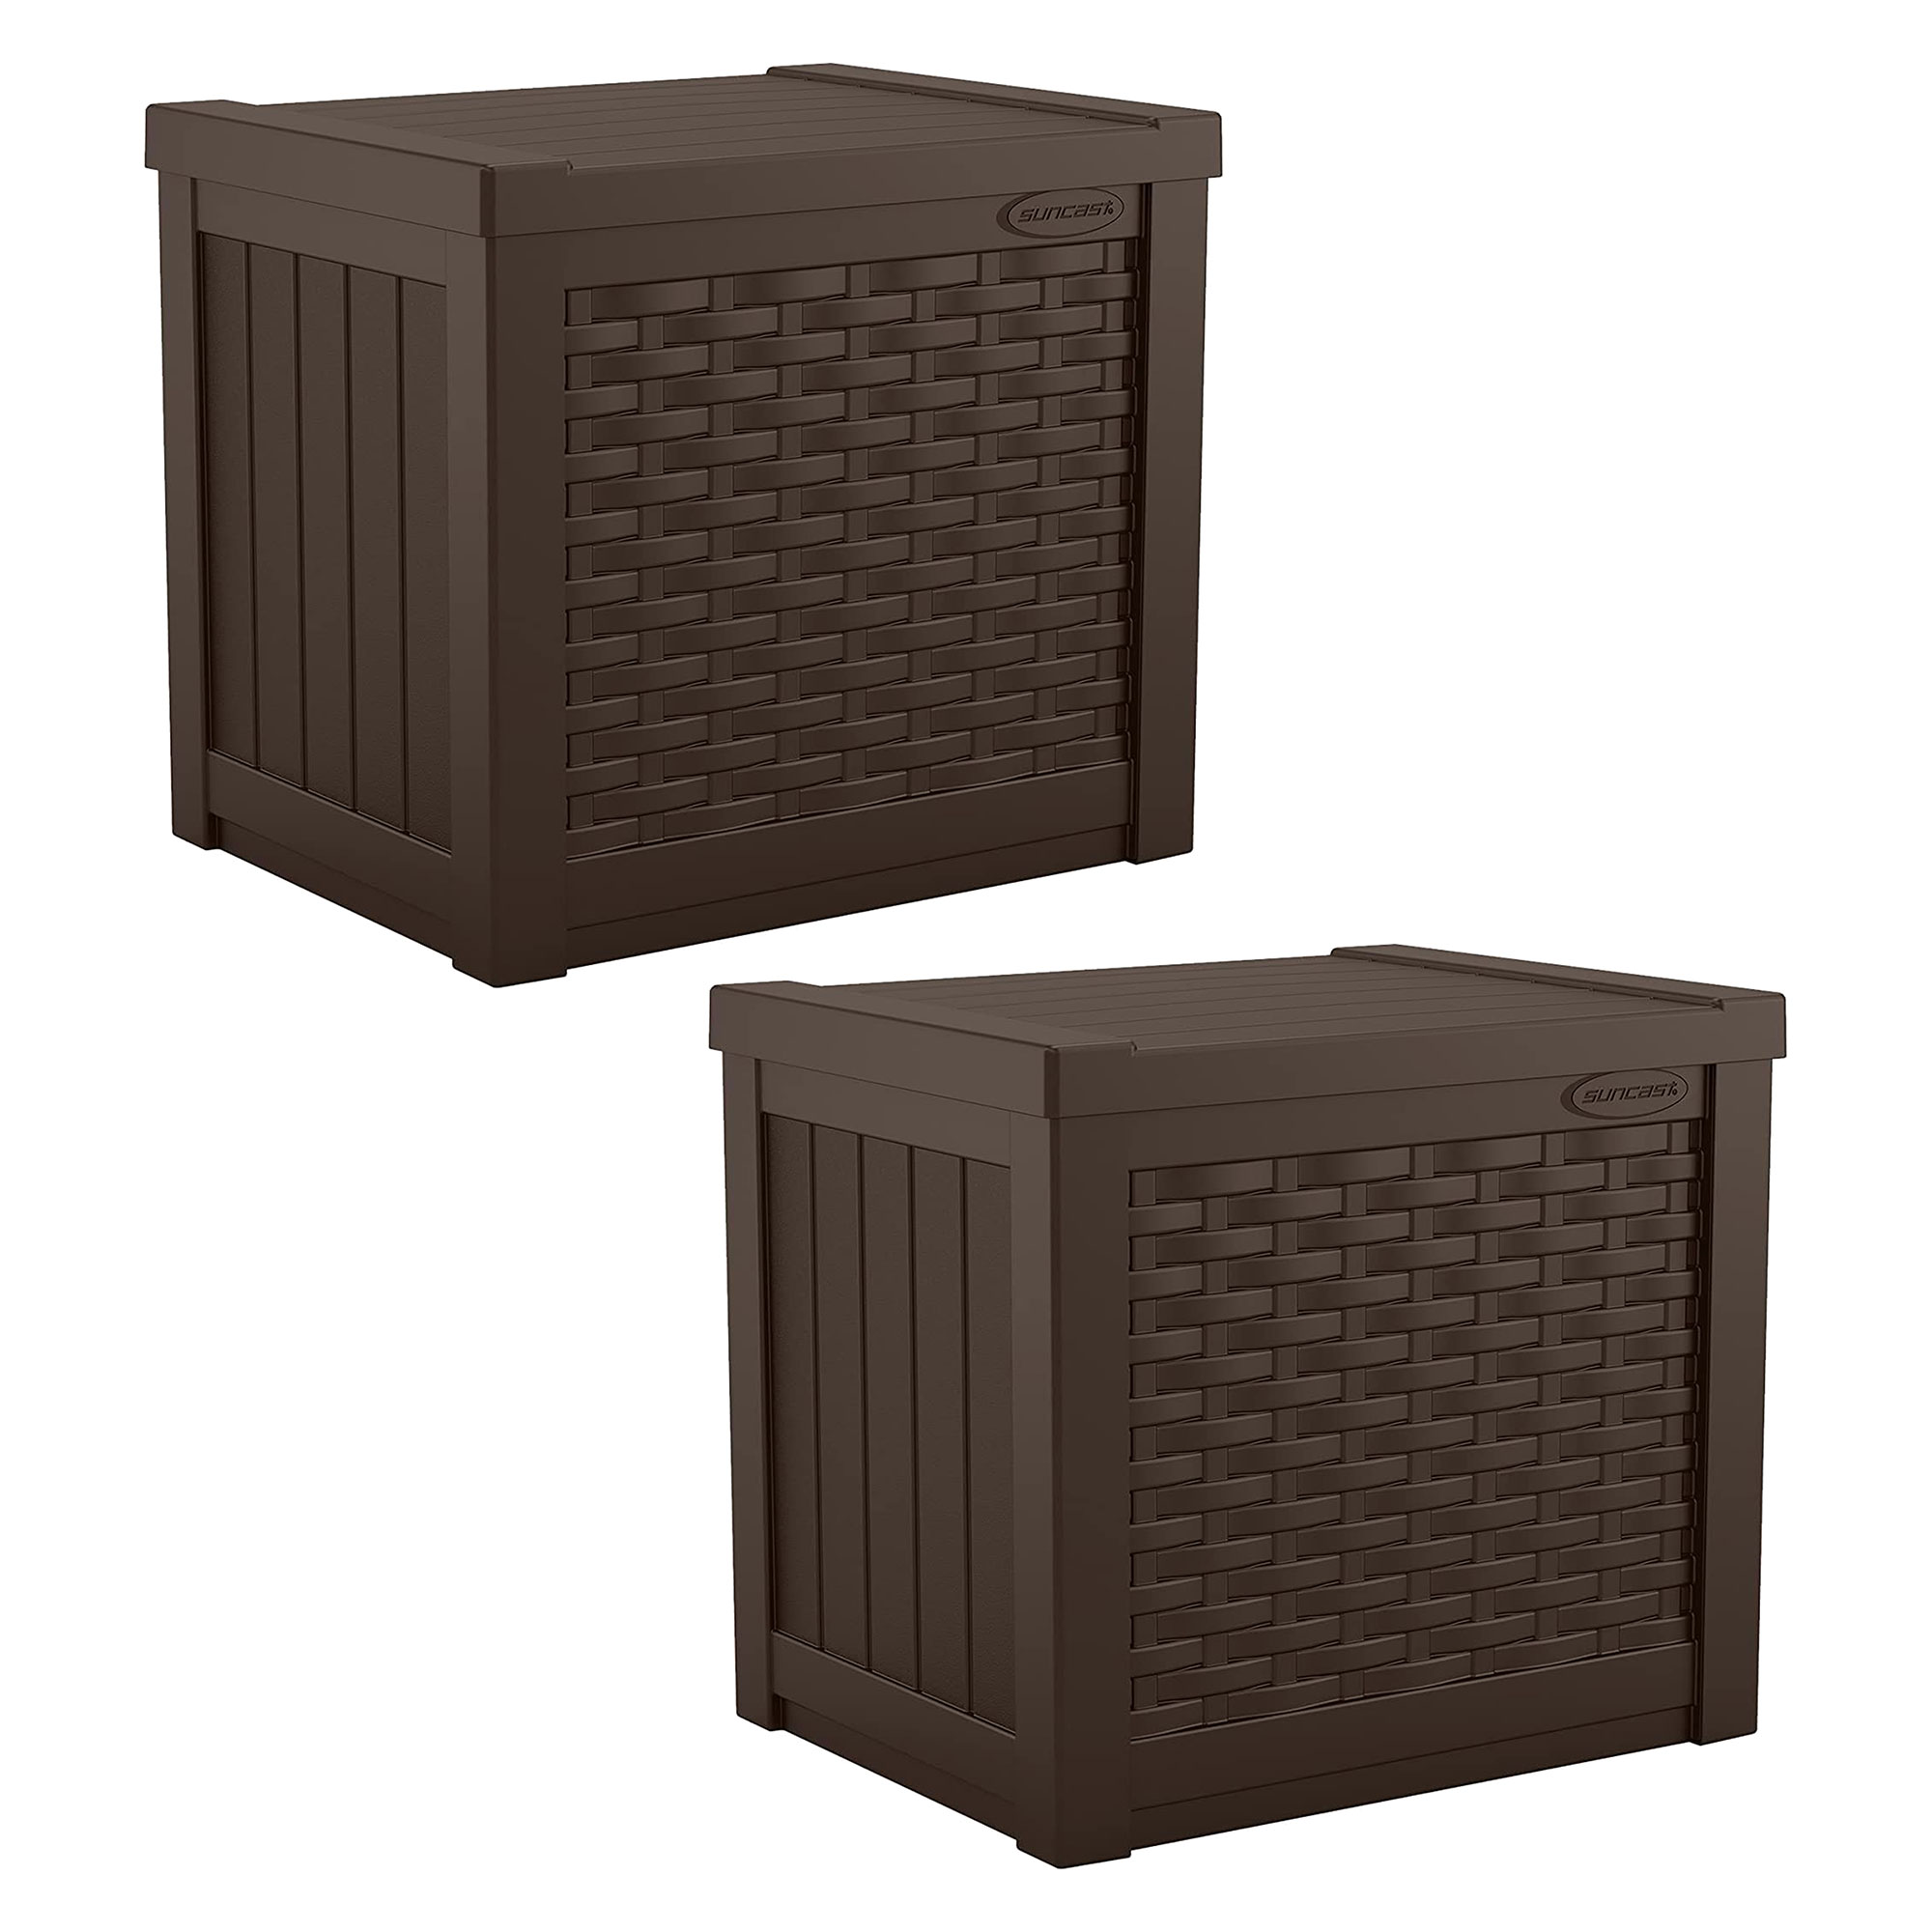 Suncast 22 Gal Outdoor Patio Small Deck Box w/ Storage Seat, Java (2 Pack) - image 1 of 10